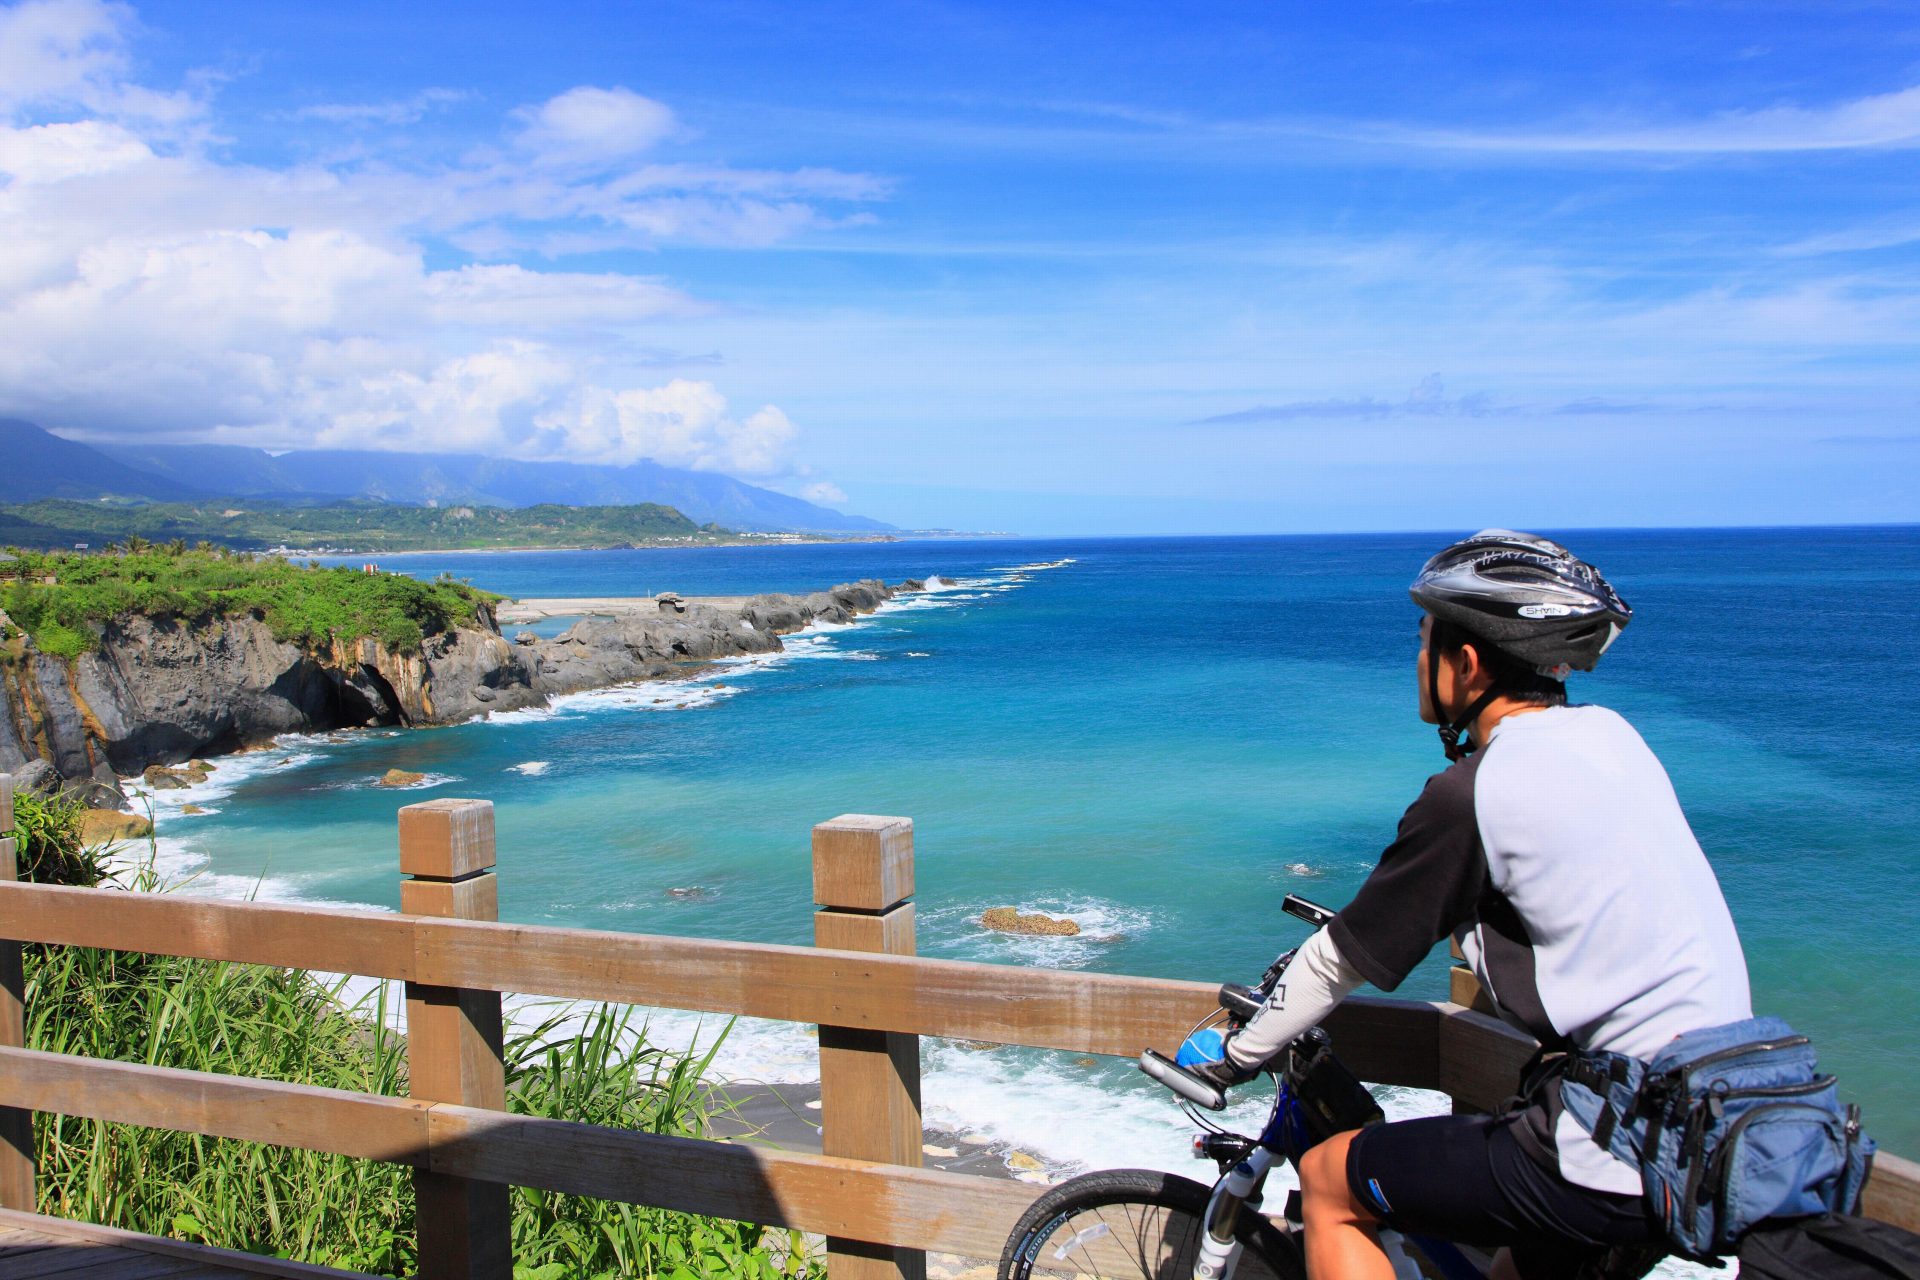 cycling in taiwan - Travel Contests: December 19, 2018 - Taiwan, Costa Rica, Austria, & more